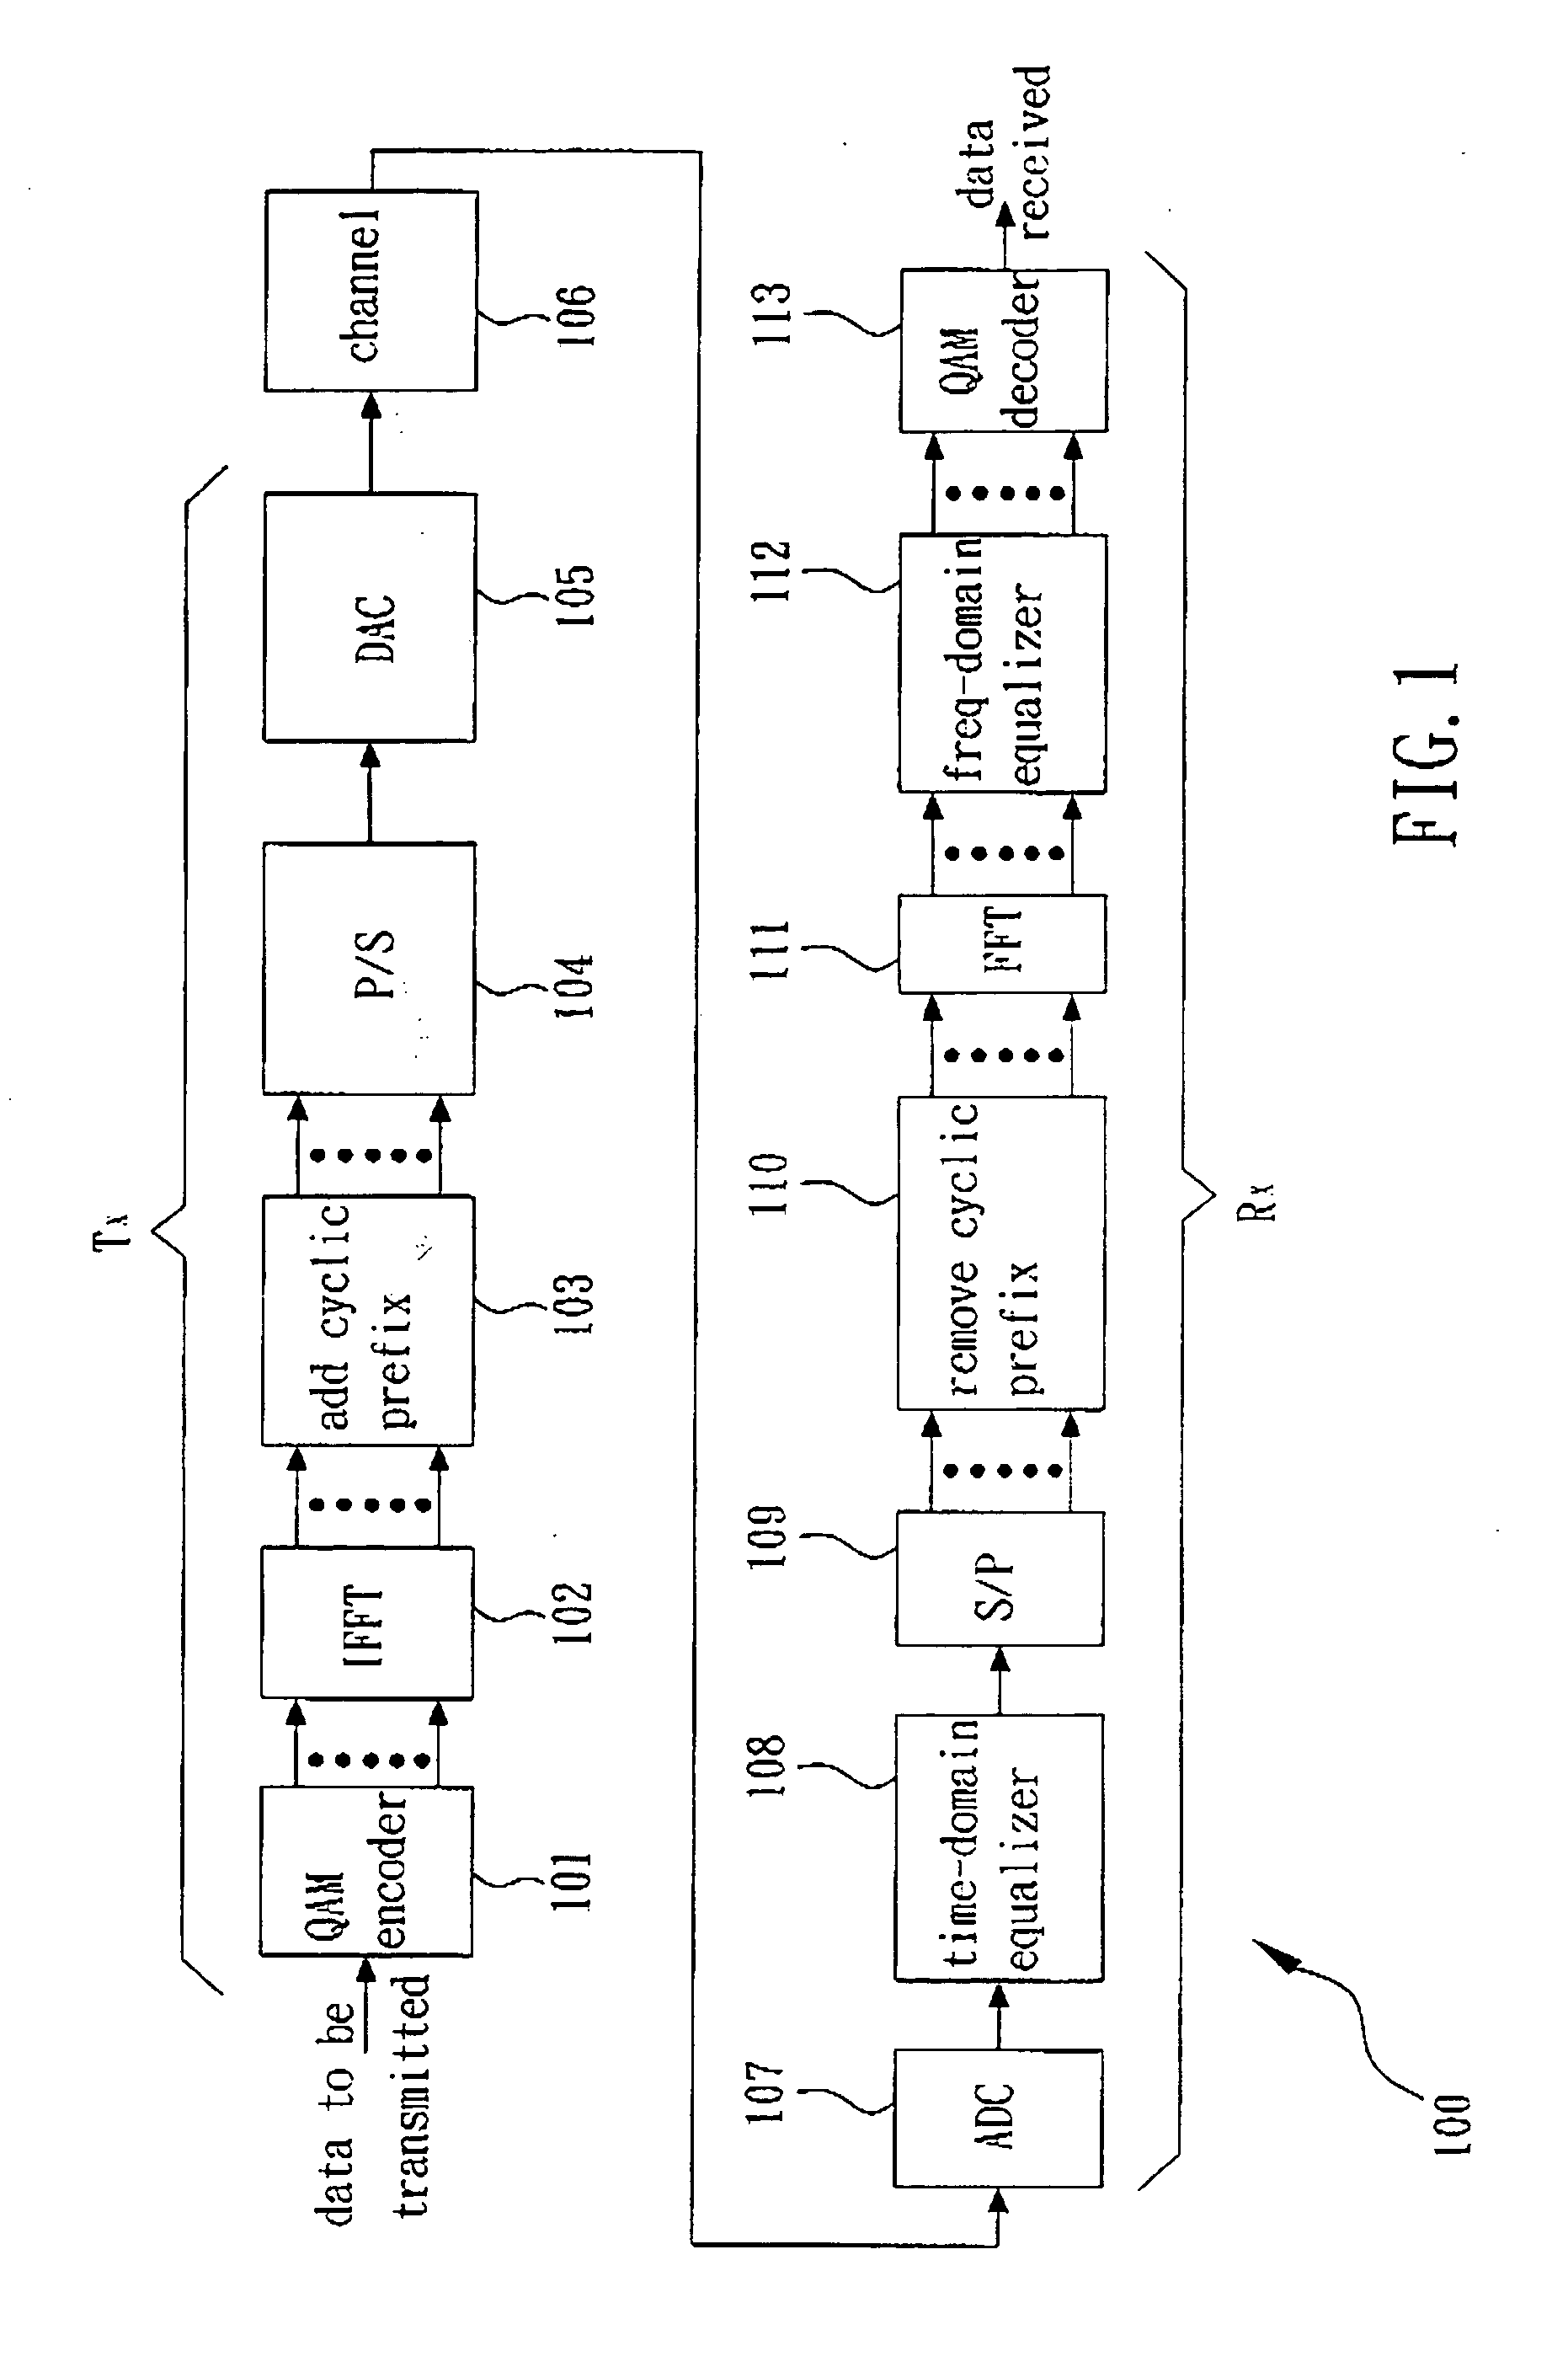 Method for initialization and stepsize control of time-domain equalizer in multi-carrier communication system